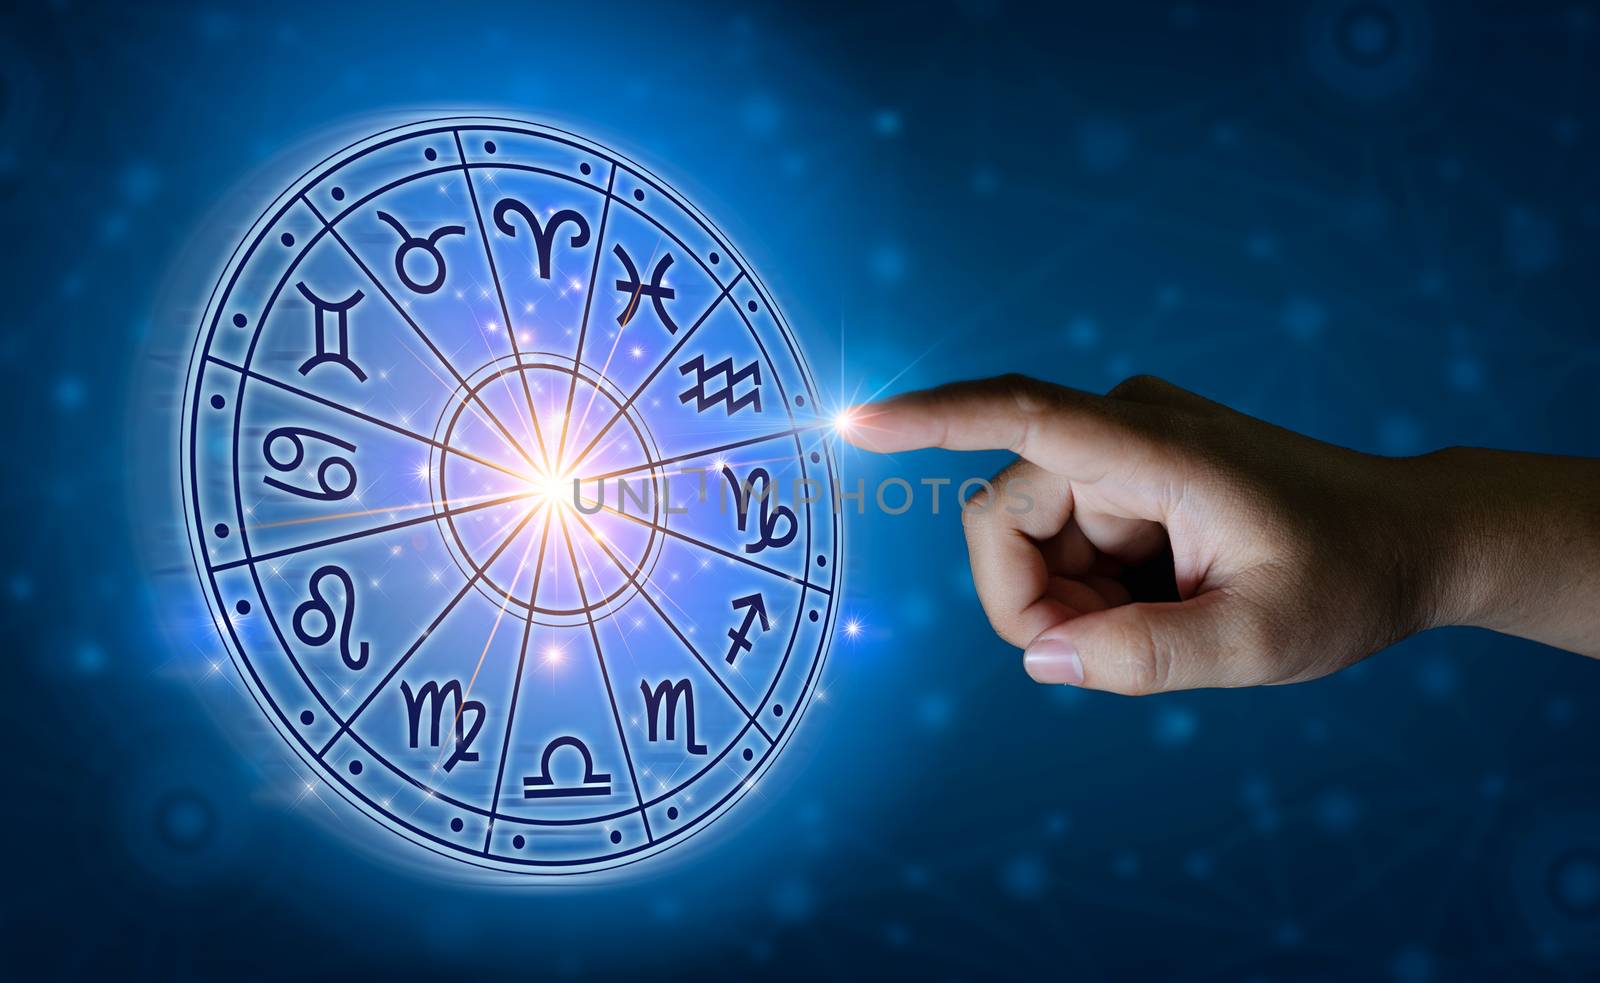 Zodiac signs inside of horoscope circle. Astrology in the sky with many stars and moons  astrology and horoscopes concept by sarayut_thaneerat